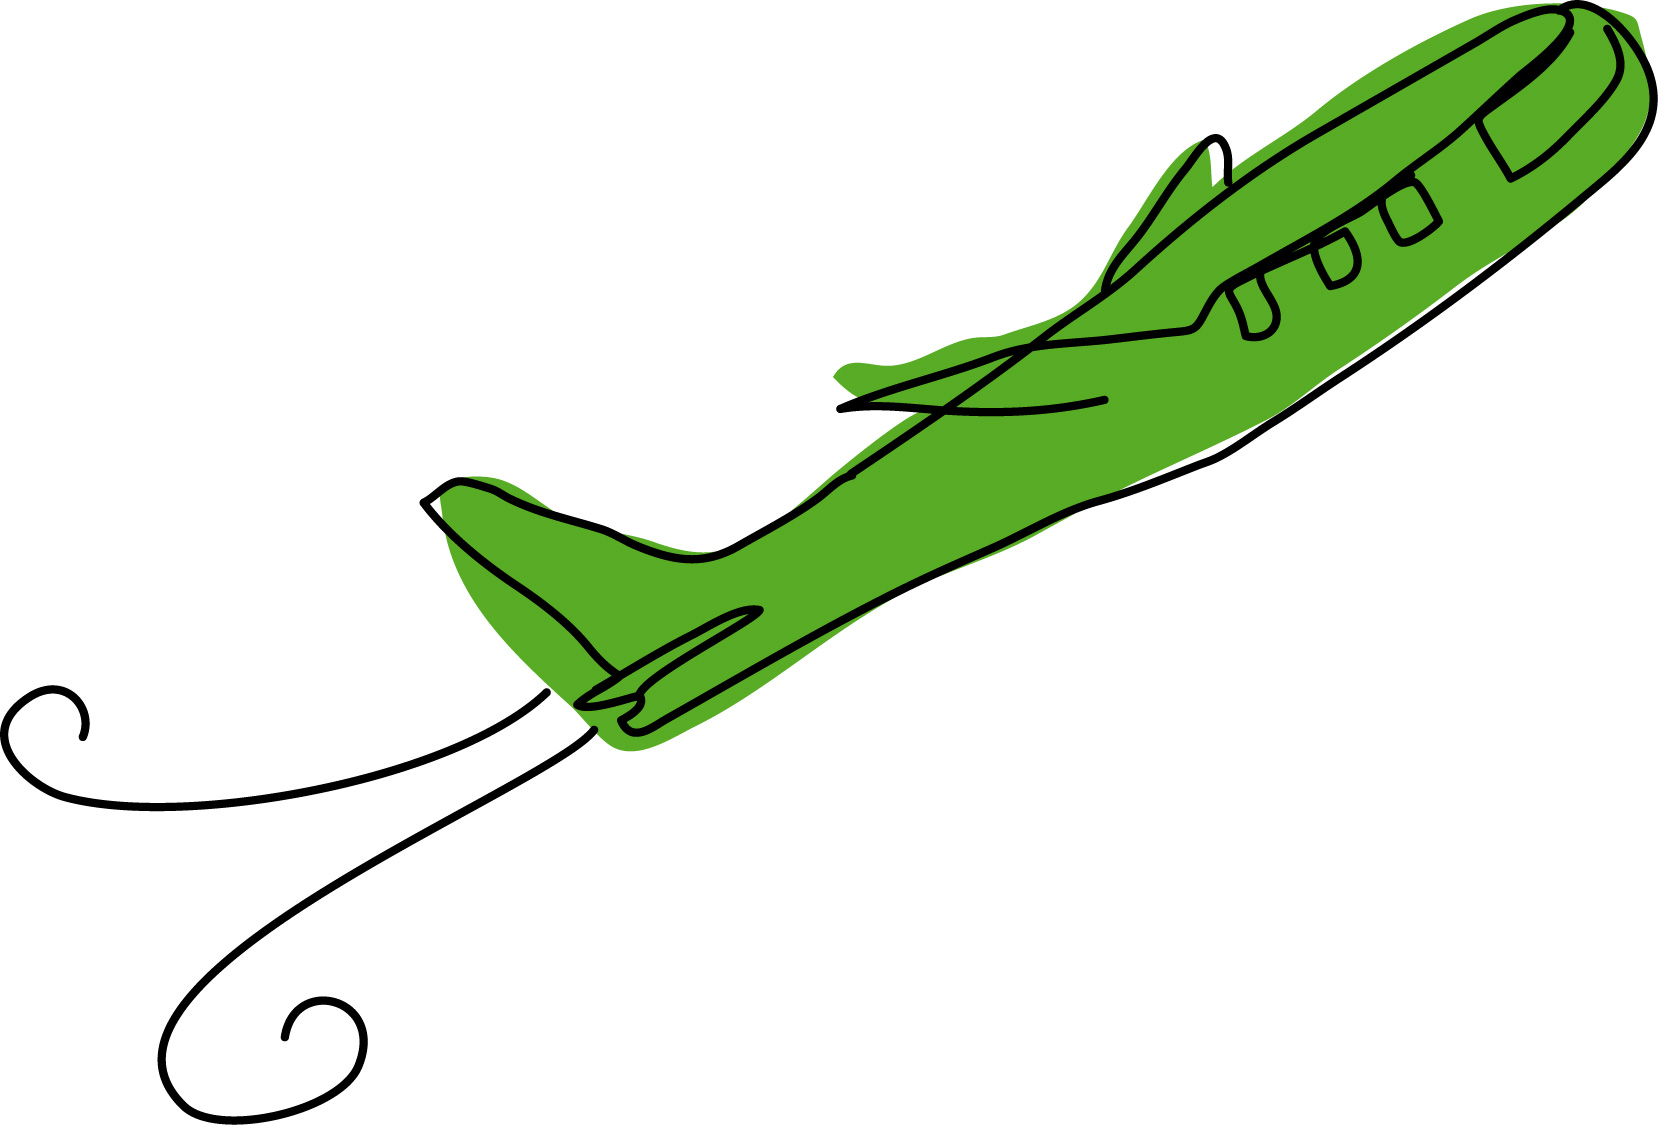 free clipart images airplane - photo #41